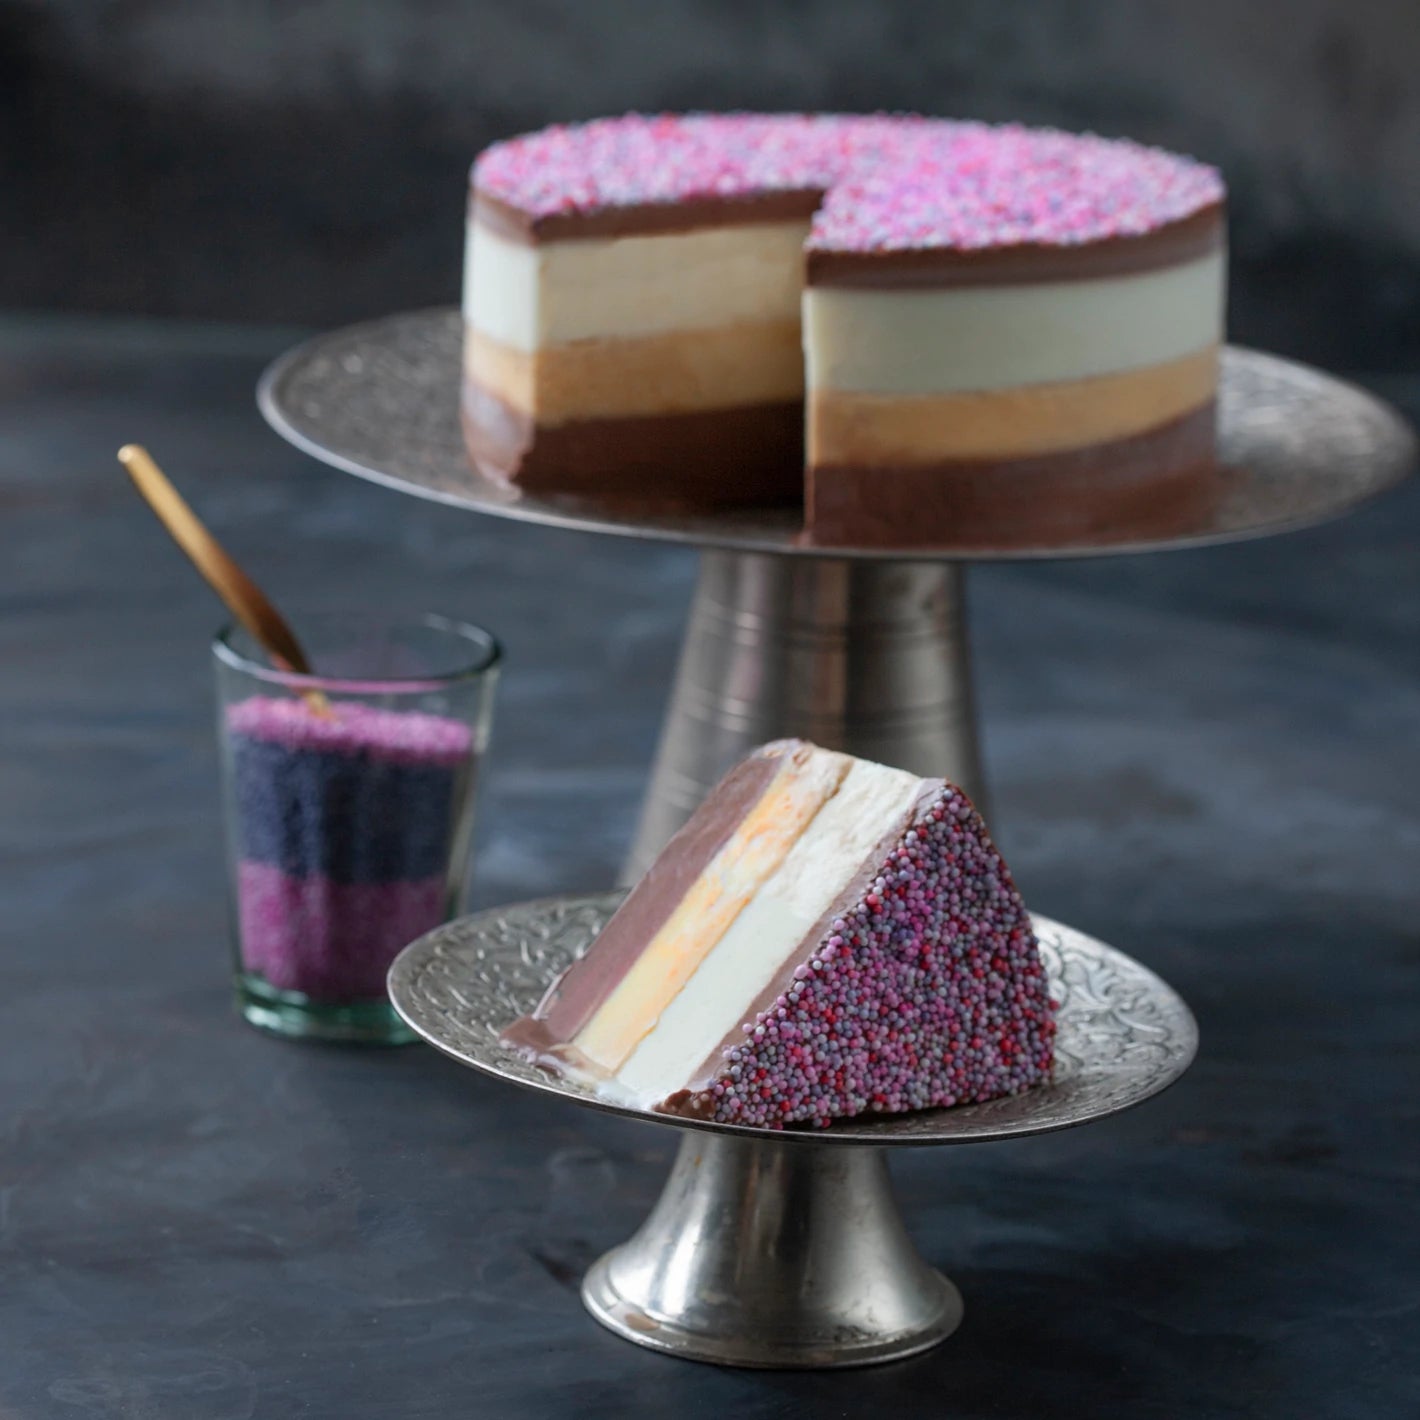 UNCLE HORACE ICE CREAM CAKE - Ruby Violet Ice Cream & Sorbet